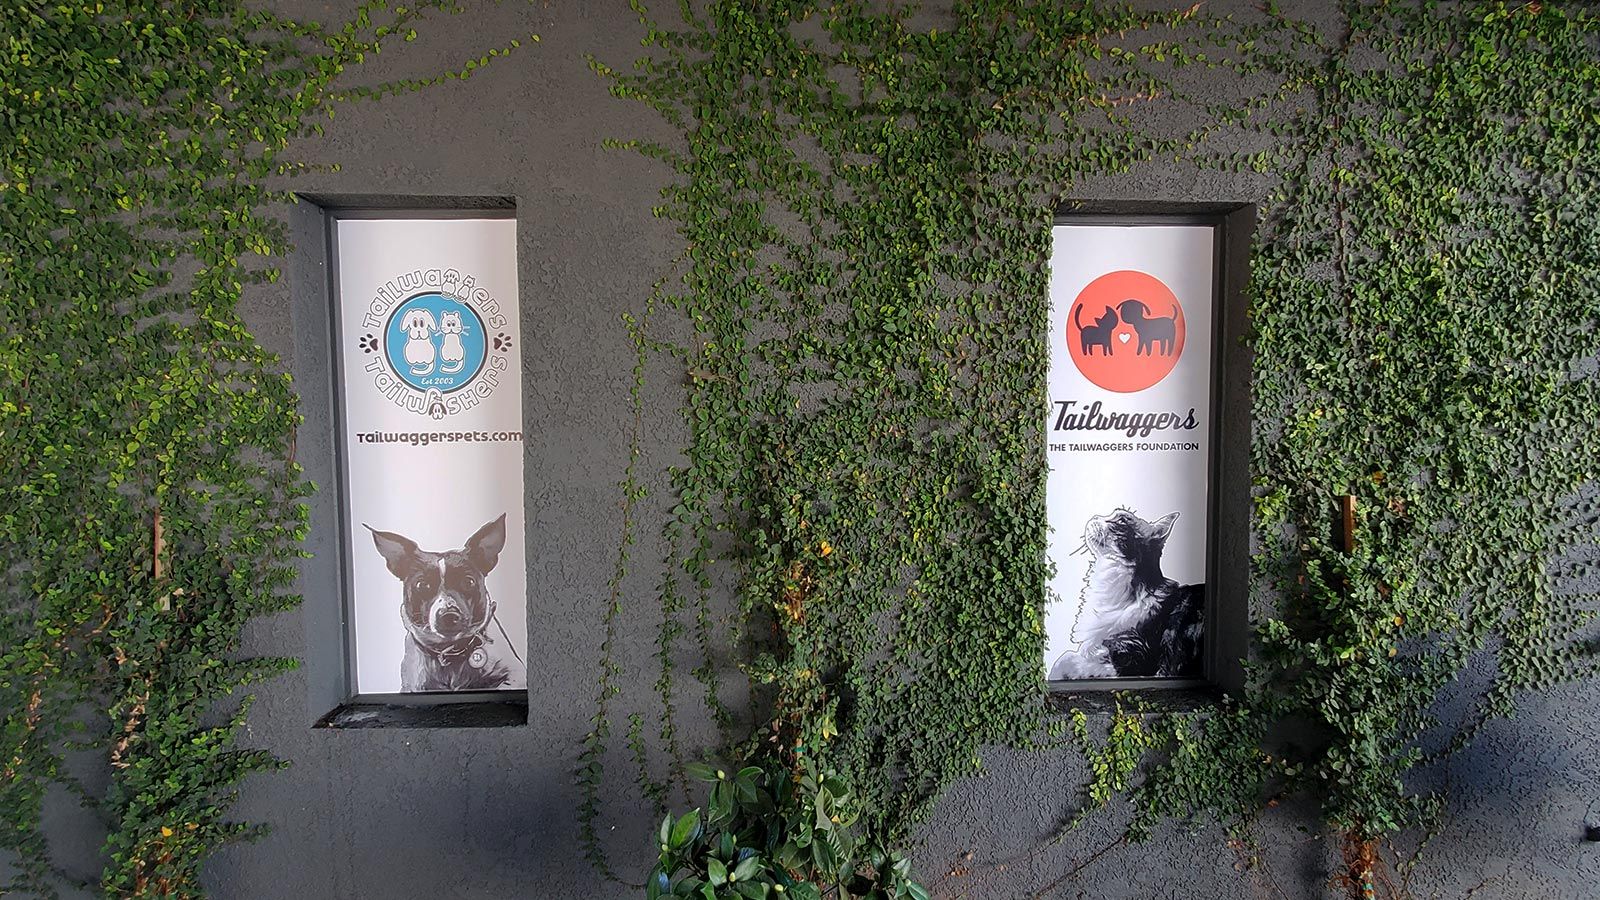 Tailwaggers window decals for exterior branding